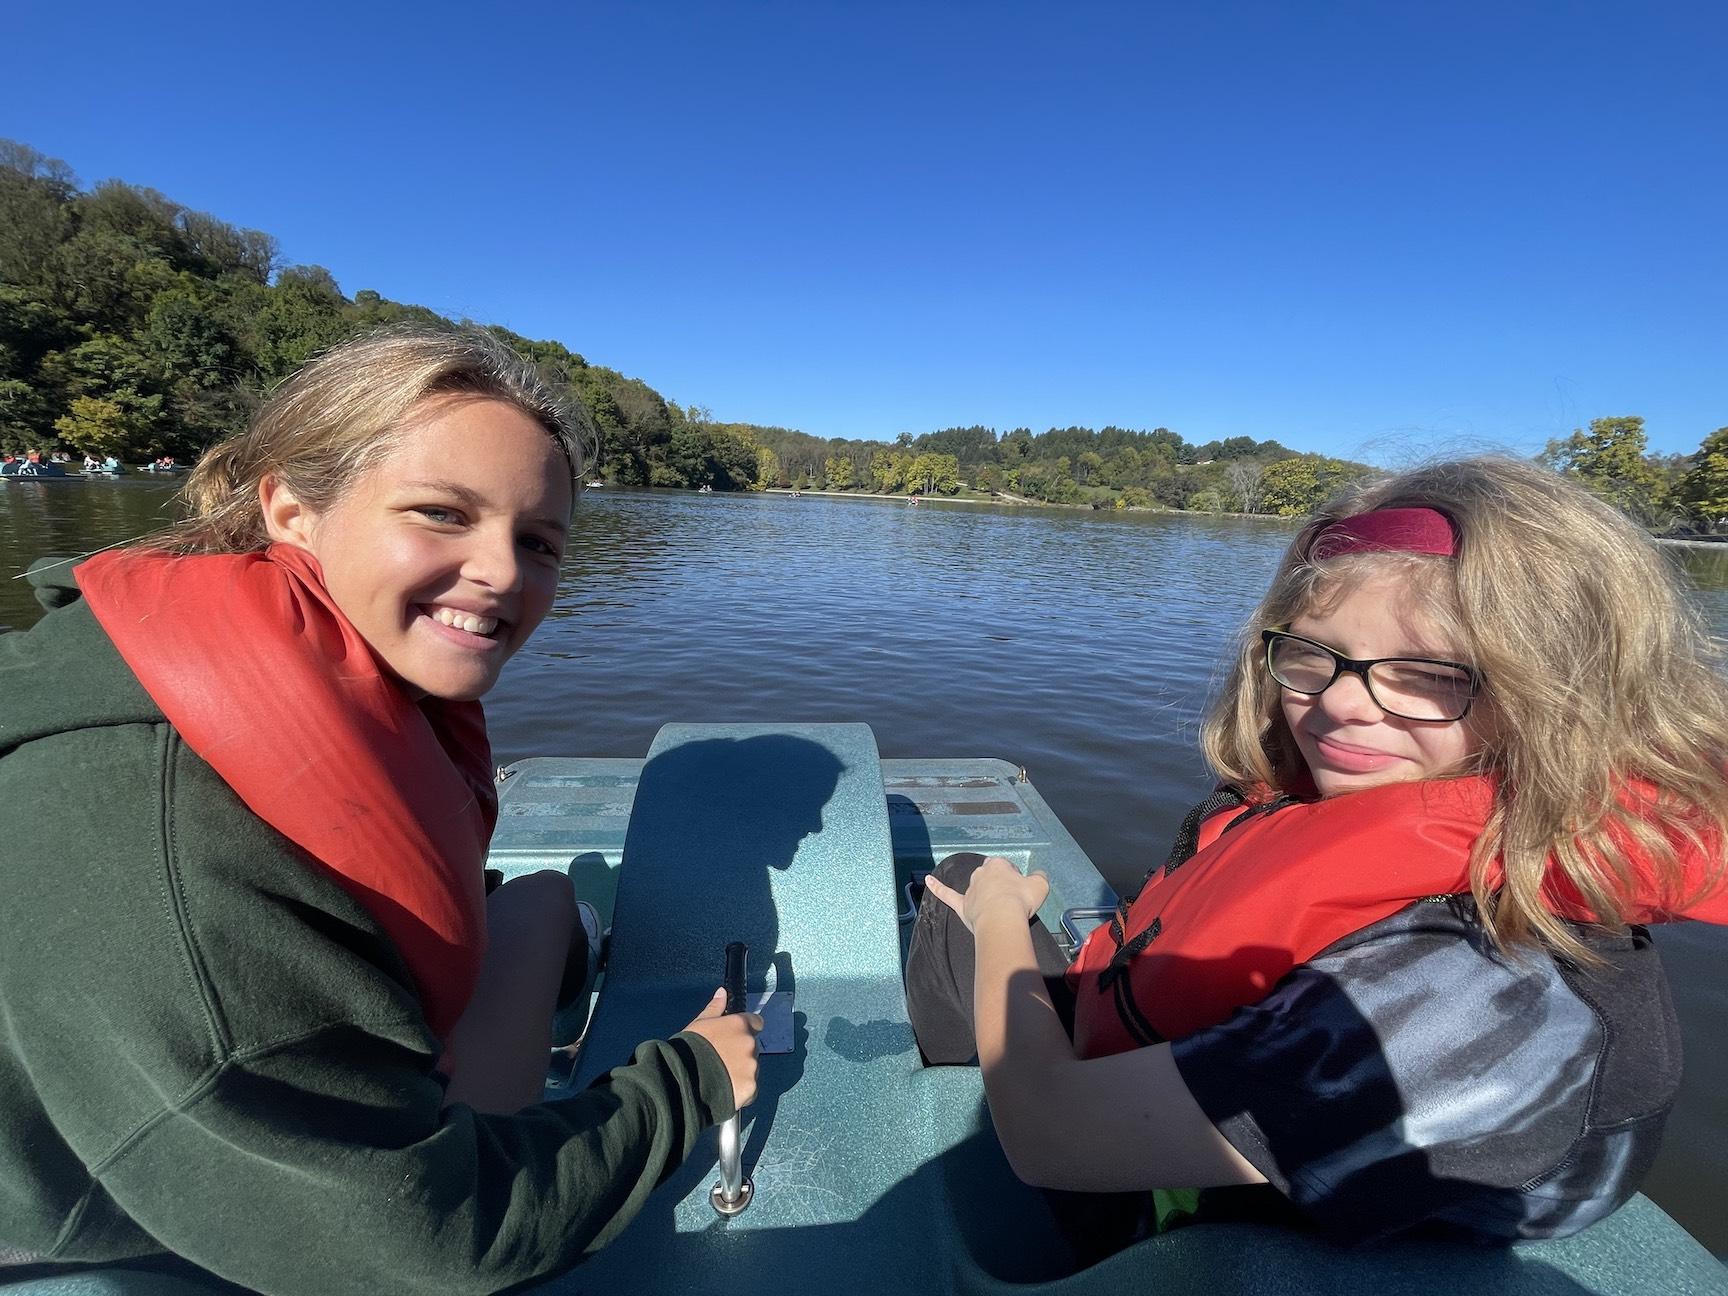 Fourth-grader Jackie LeCuyer (right) and her buddy take a boat ride